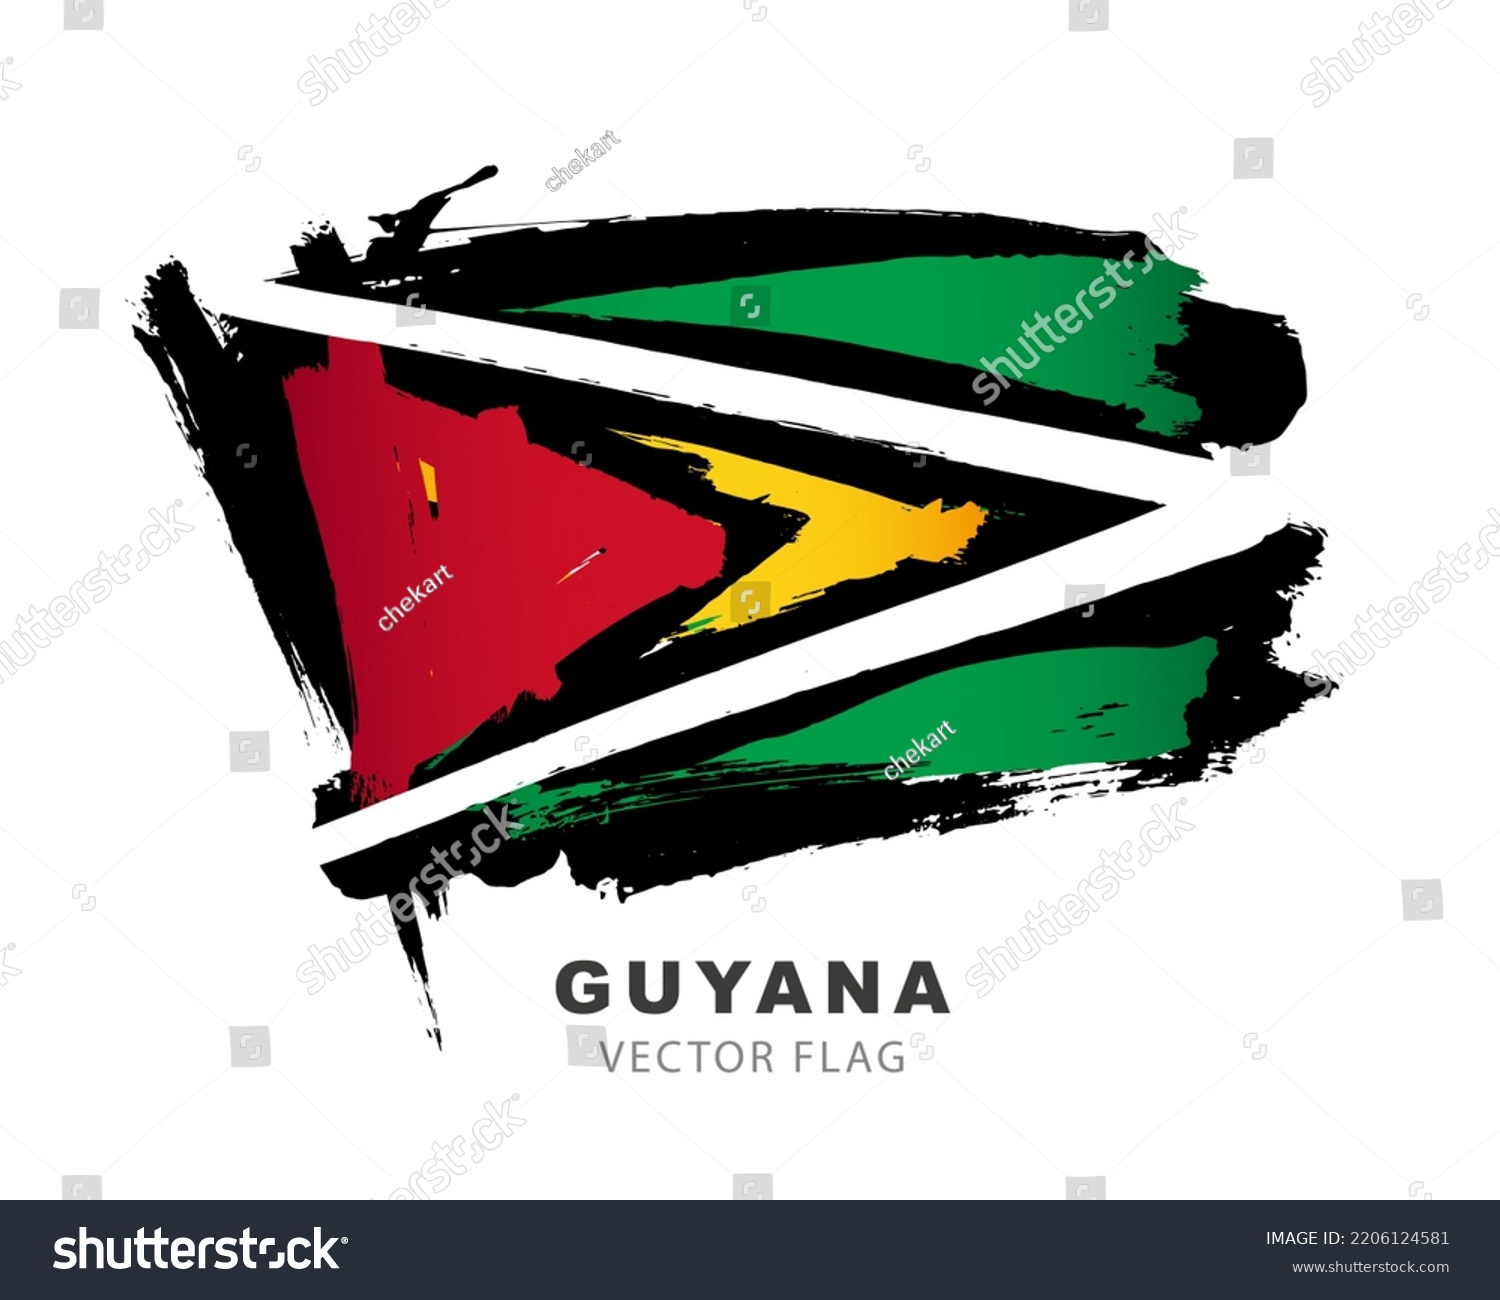 SVG of Flag of Guyana. Colored brush strokes drawn by hand. Vector illustration isolated on white background. Colorful Guyanese flag logo. svg